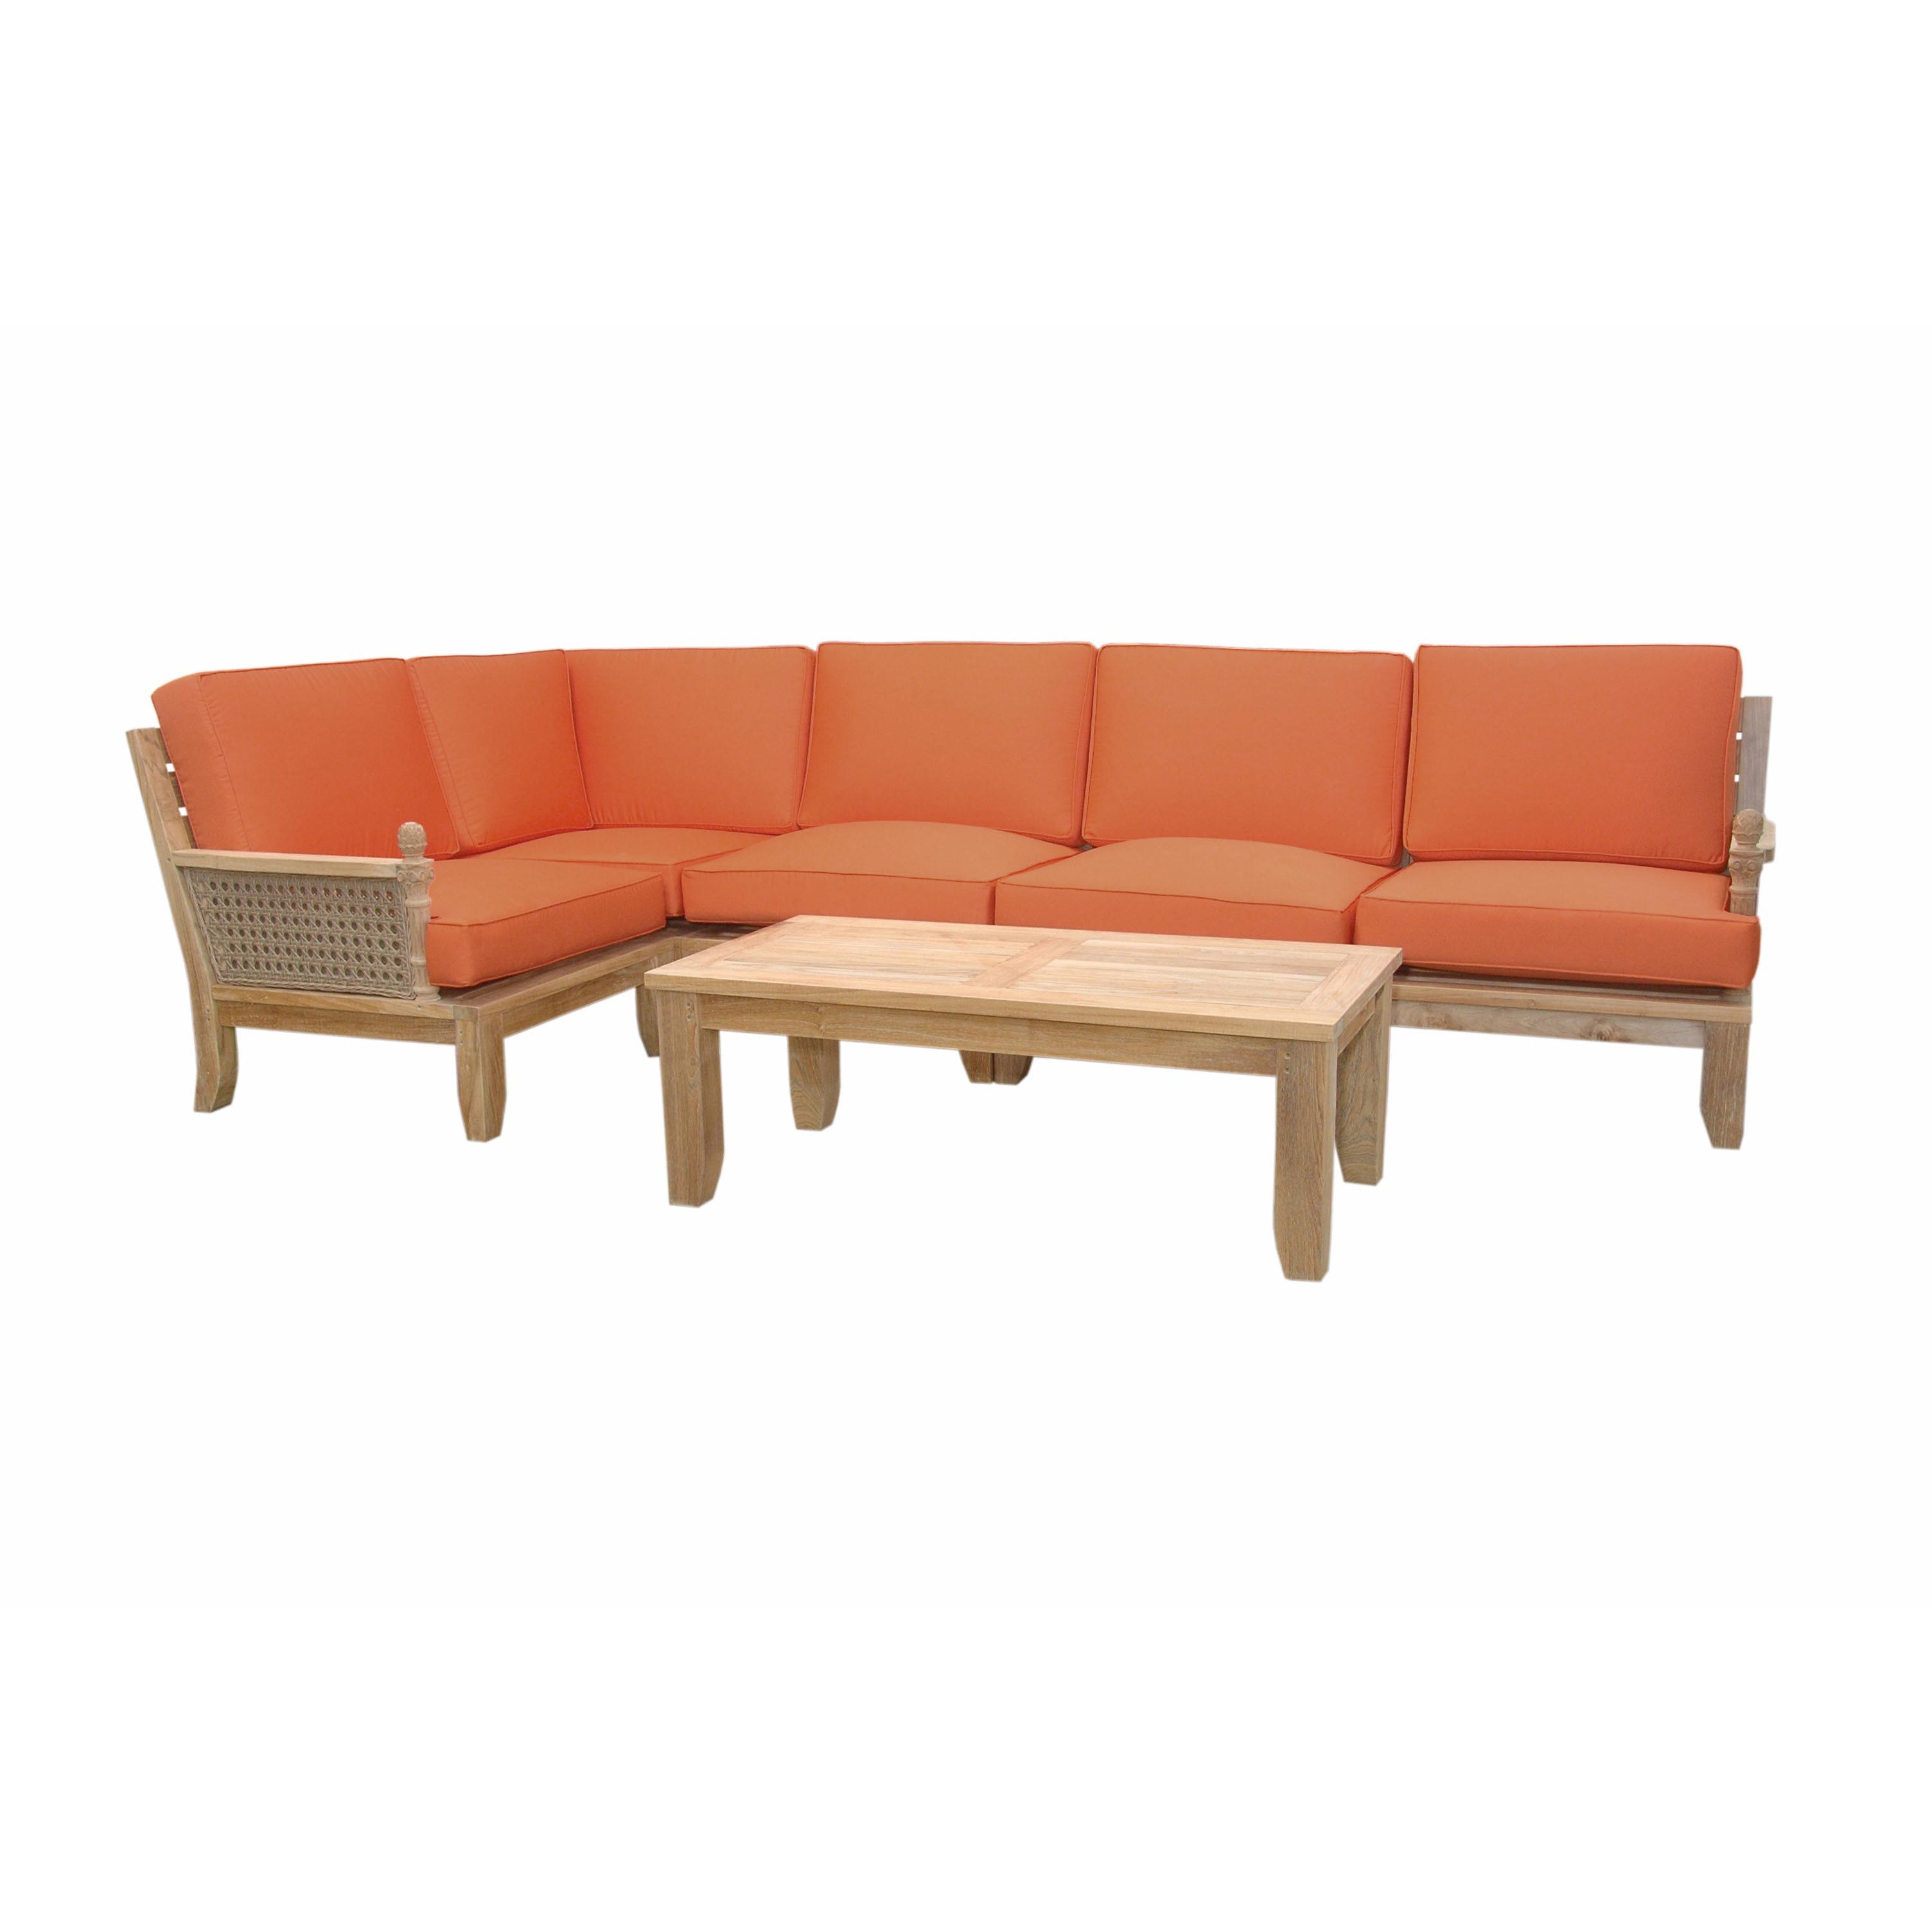 Teak Luxe Seating Collection with 2 Center Seats